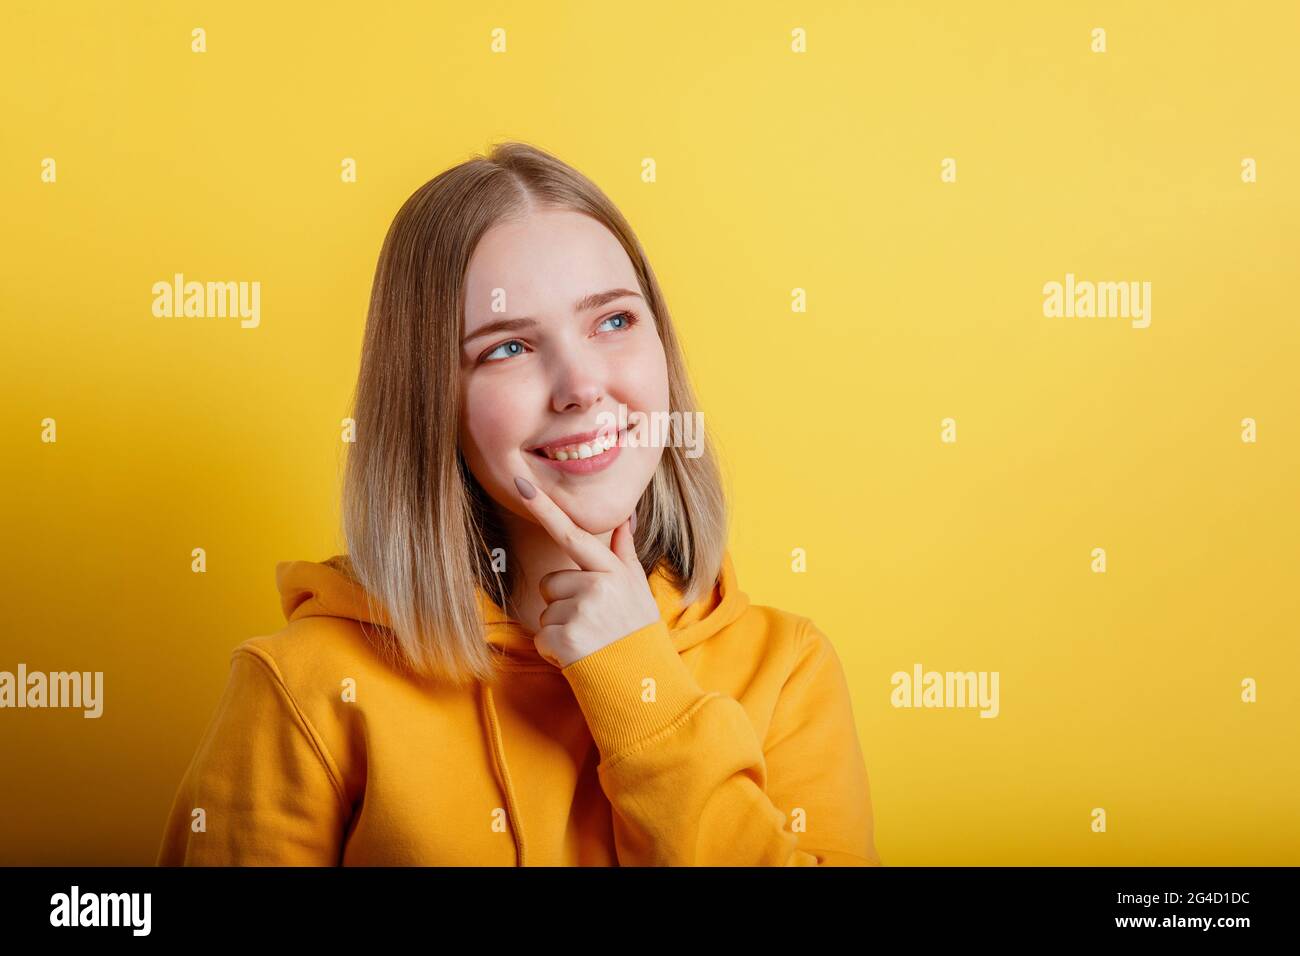 Happy smiling young woman think thought. Portrait of emotional teenage girl looking on empty space deep thinking about idea or positive question on Stock Photo